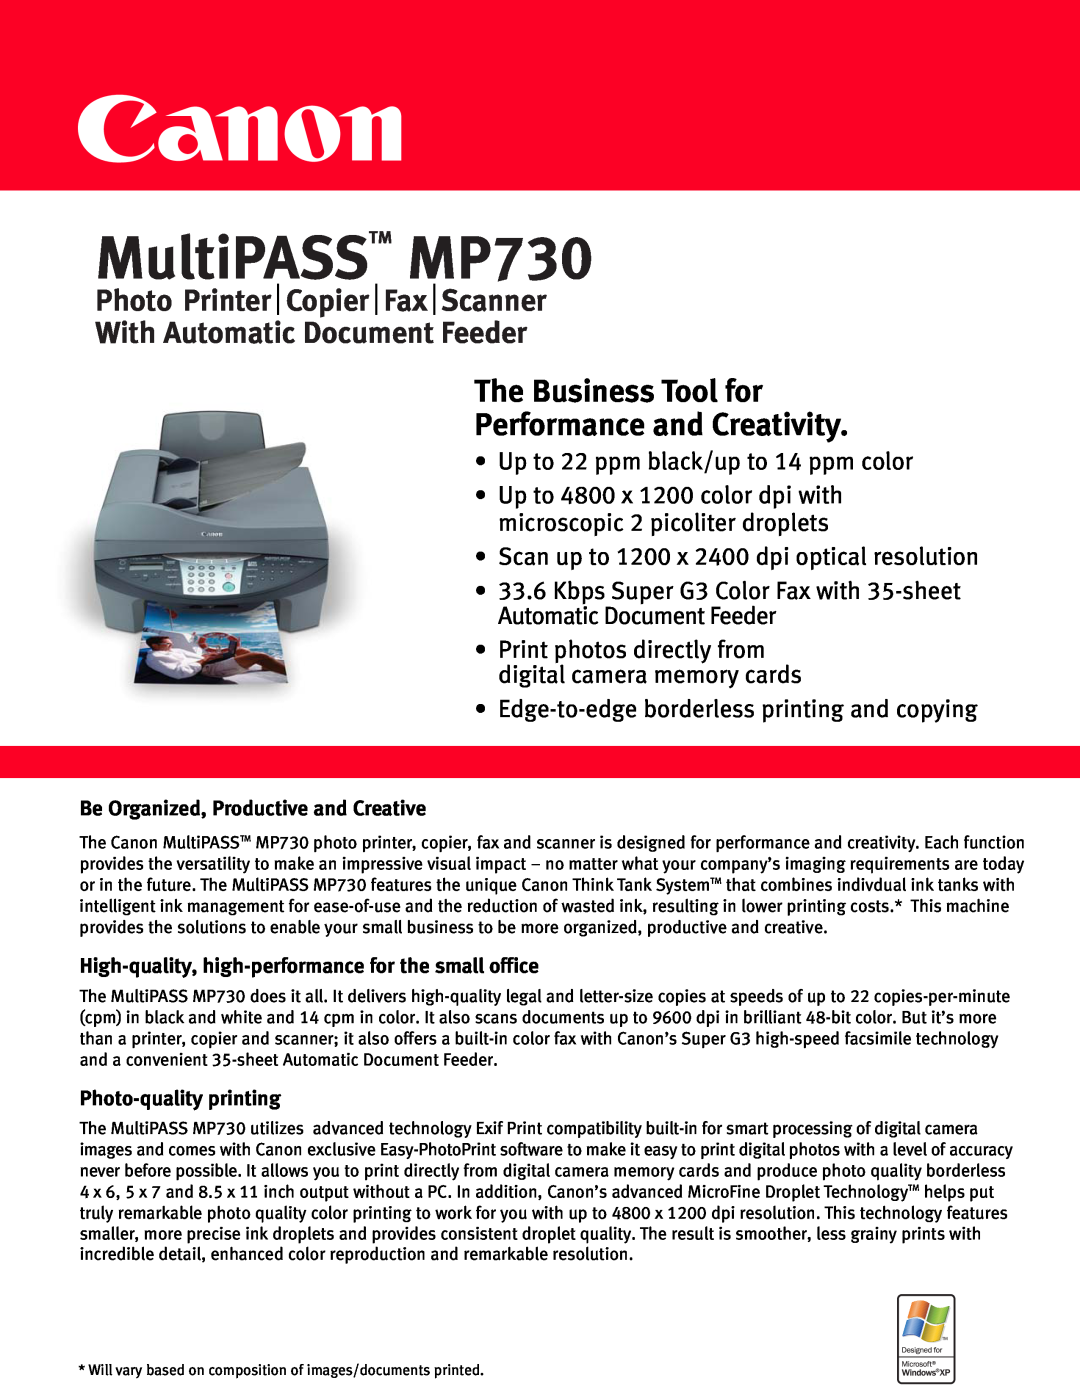 Canon manual MultiPASS TM MP730, The Business Tool for Performance and Creativity, Photo-quality printing, Preliminary 